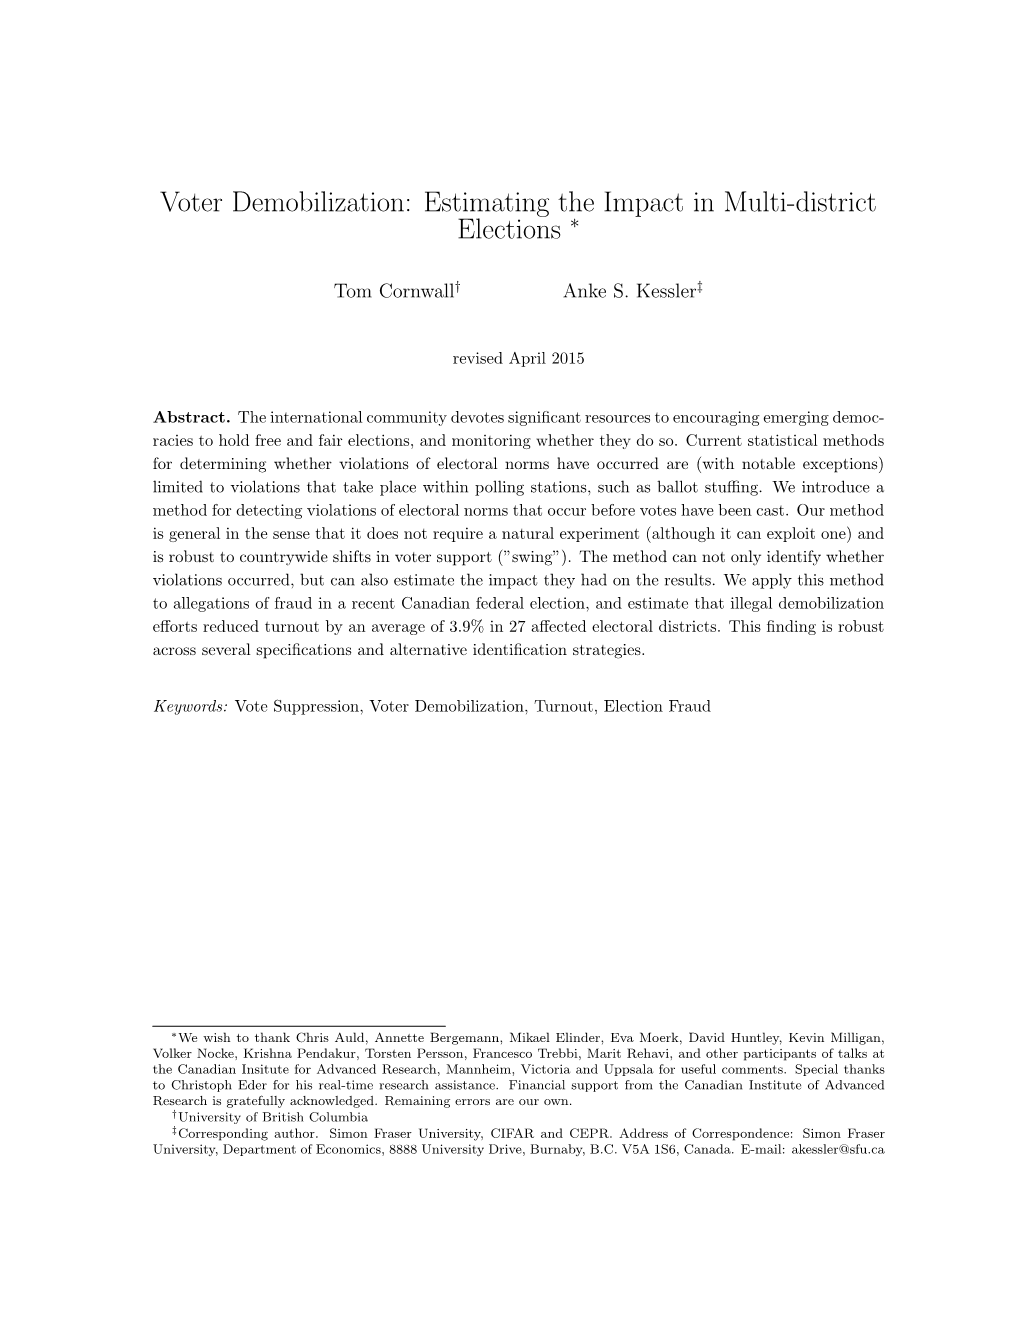 Voter Demobilization: Estimating the Impact in Multi-District Elections ⇤